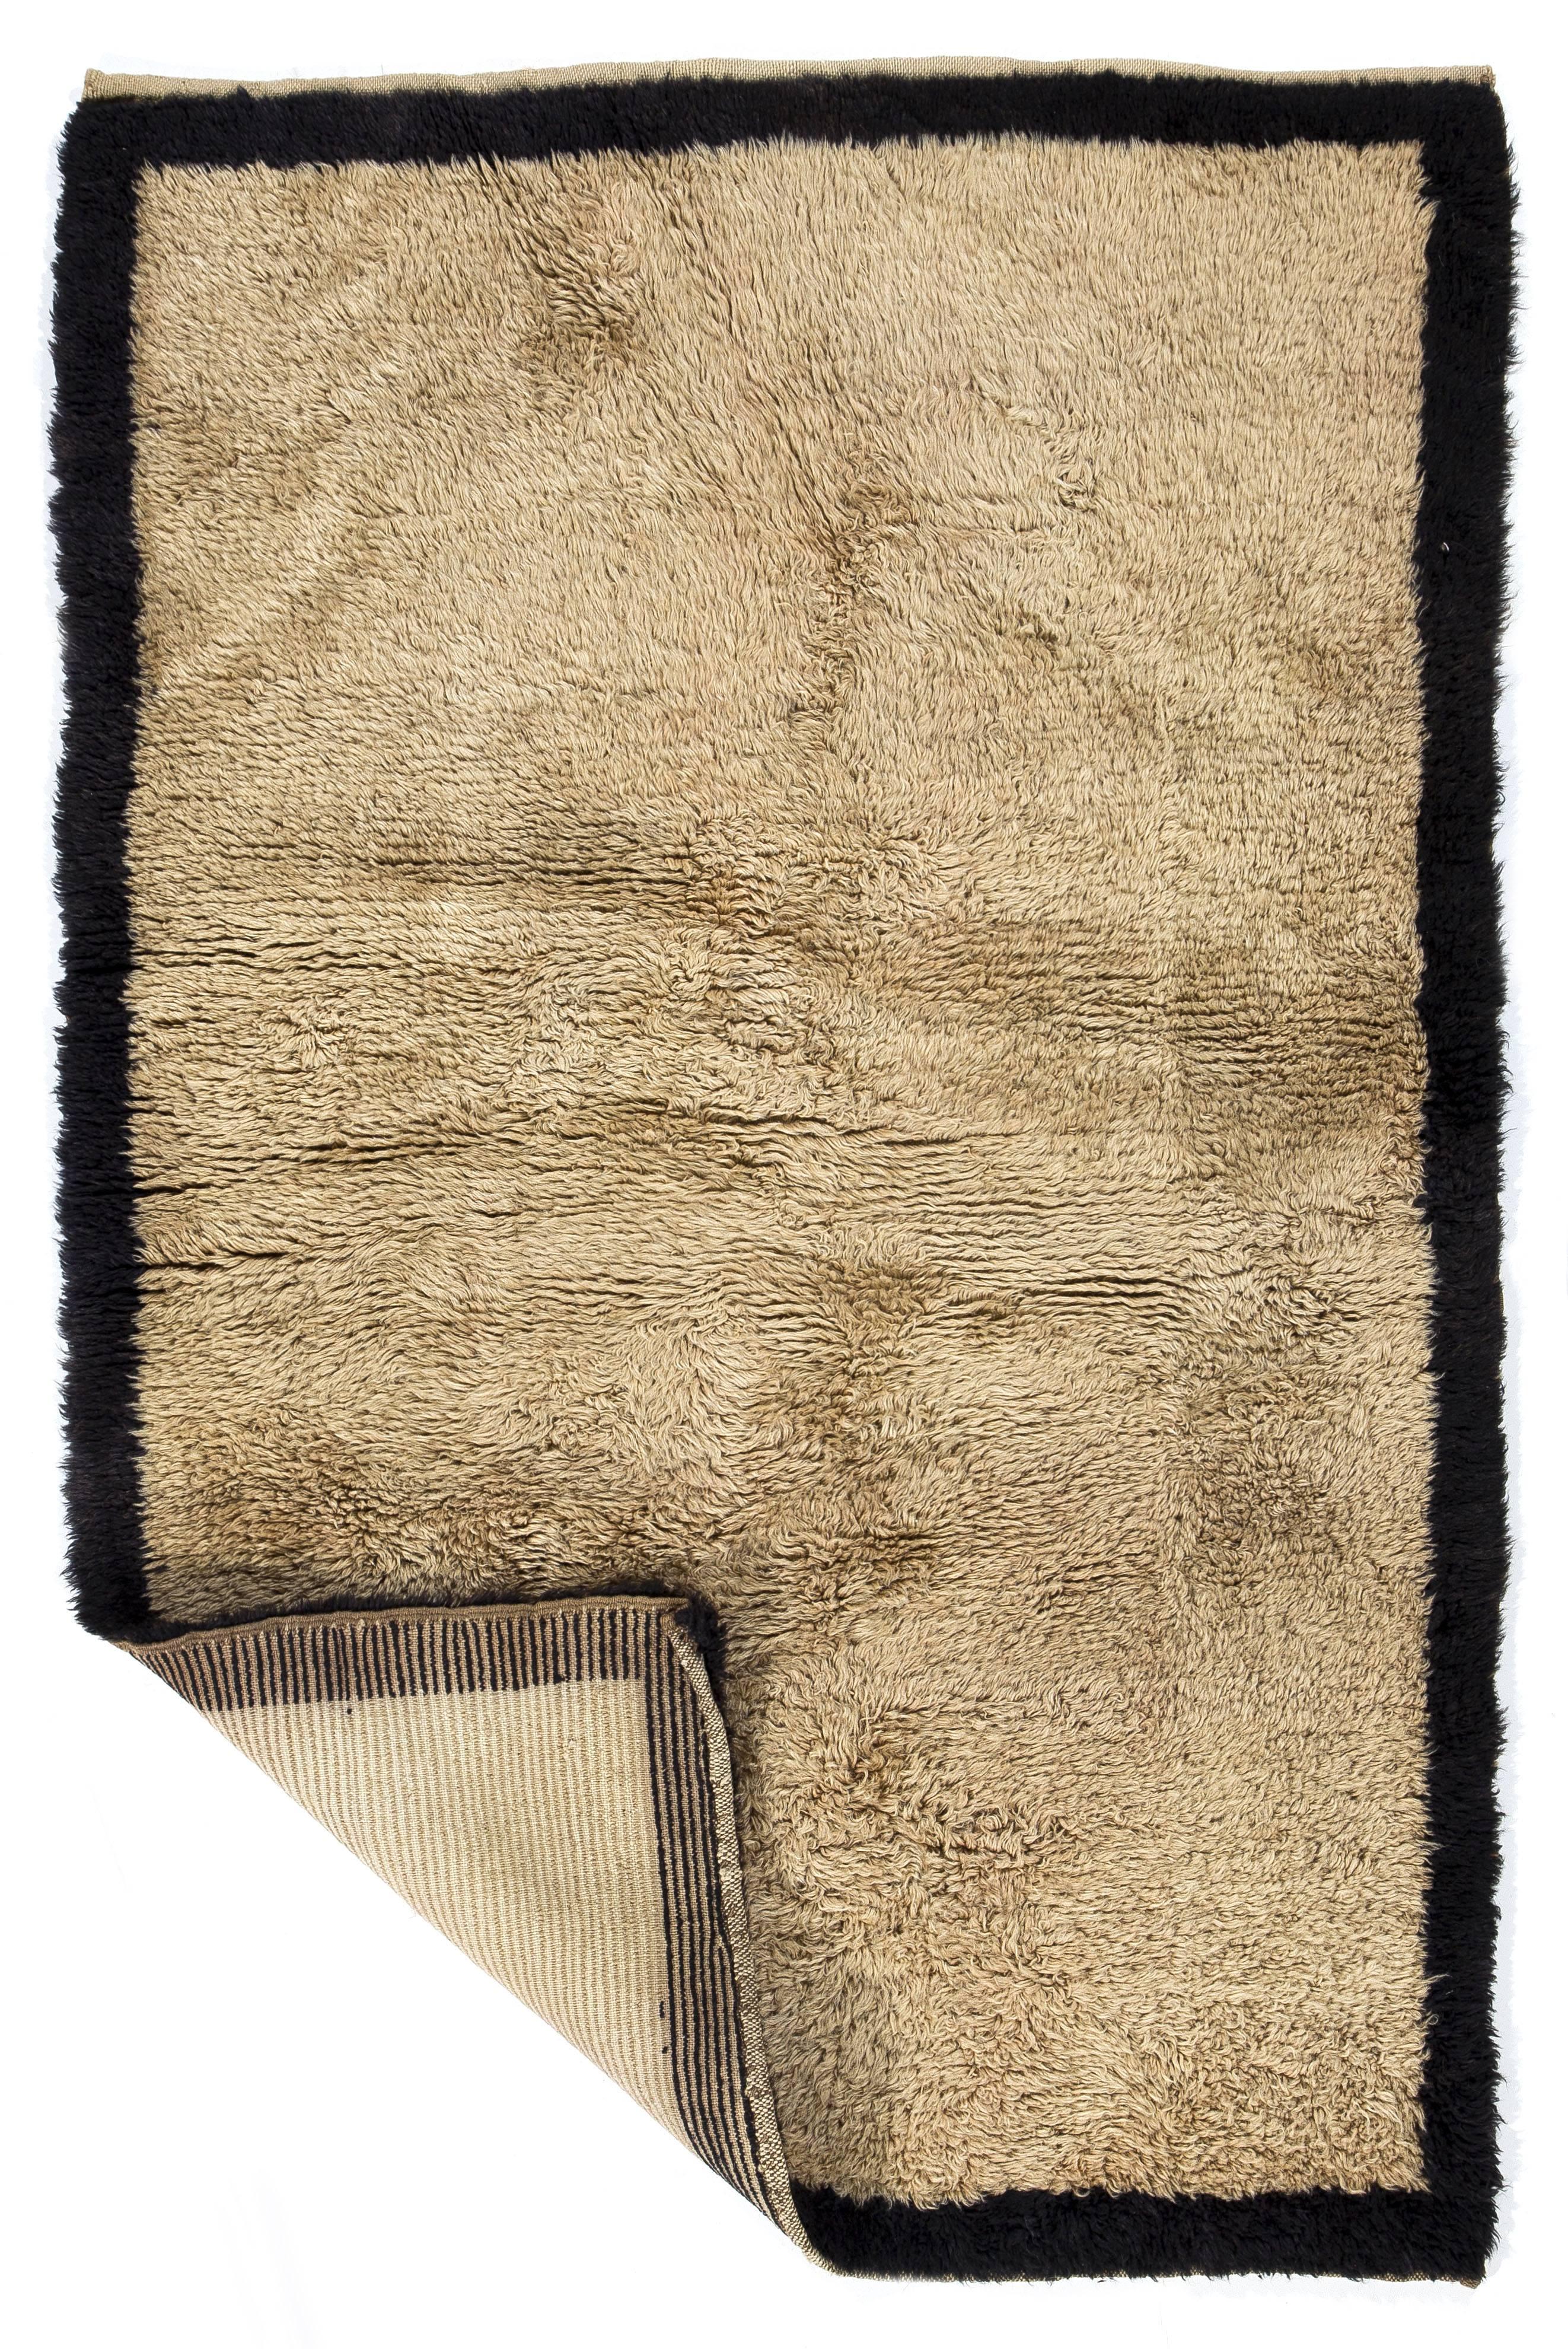 A vintage hand-knotted Tulu (Turkish word for long/thick piled) rug from Konya in Central Anatolia, Turkey. 100% natural undyed hand-spun lambswool.

These simple, functional, small rugs with clear, plain design and lustrous wool pile were made for